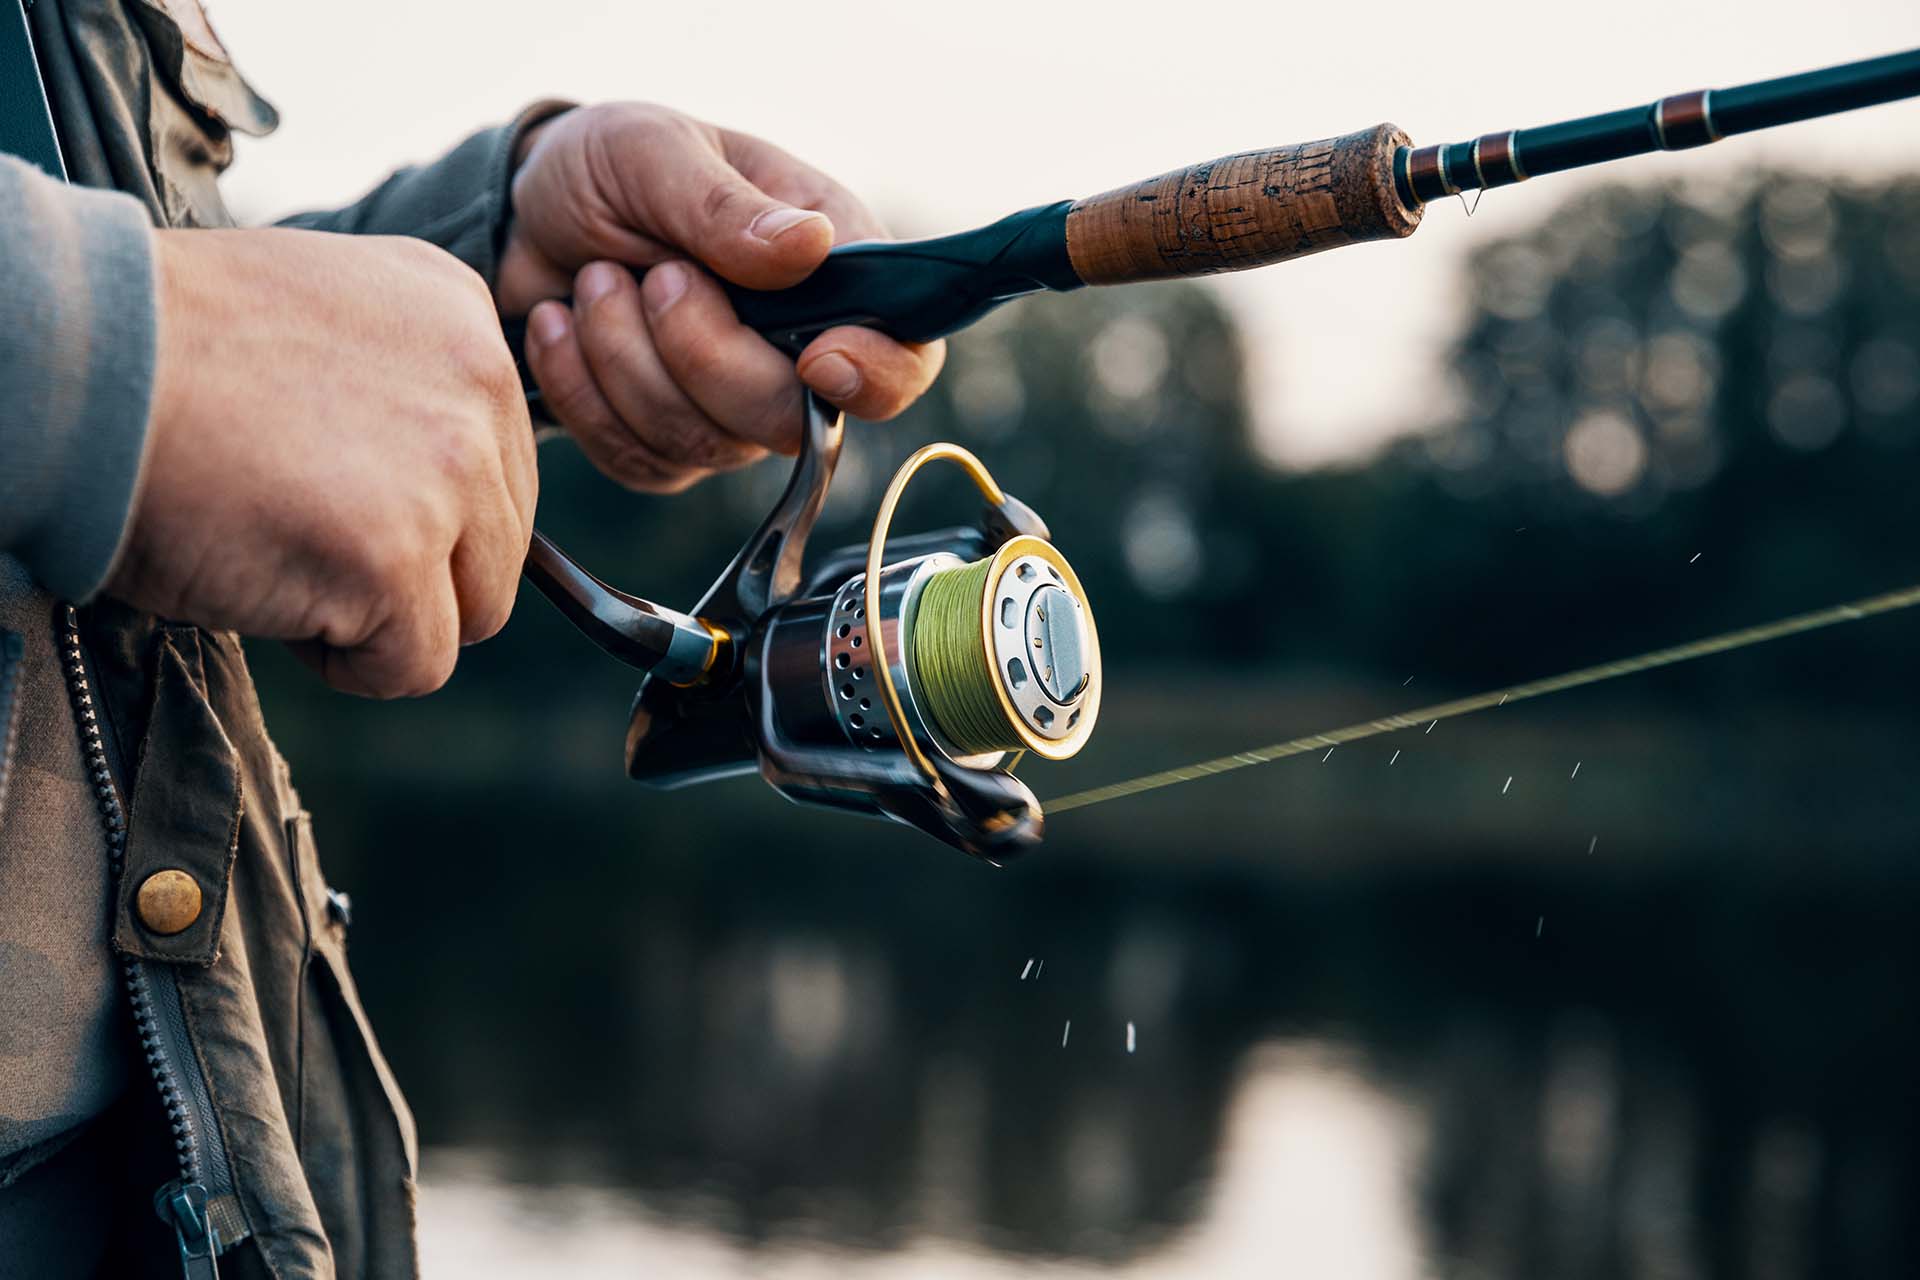 Fishing rod with a spinning reel in the hands of a fisherman. Fishing background.